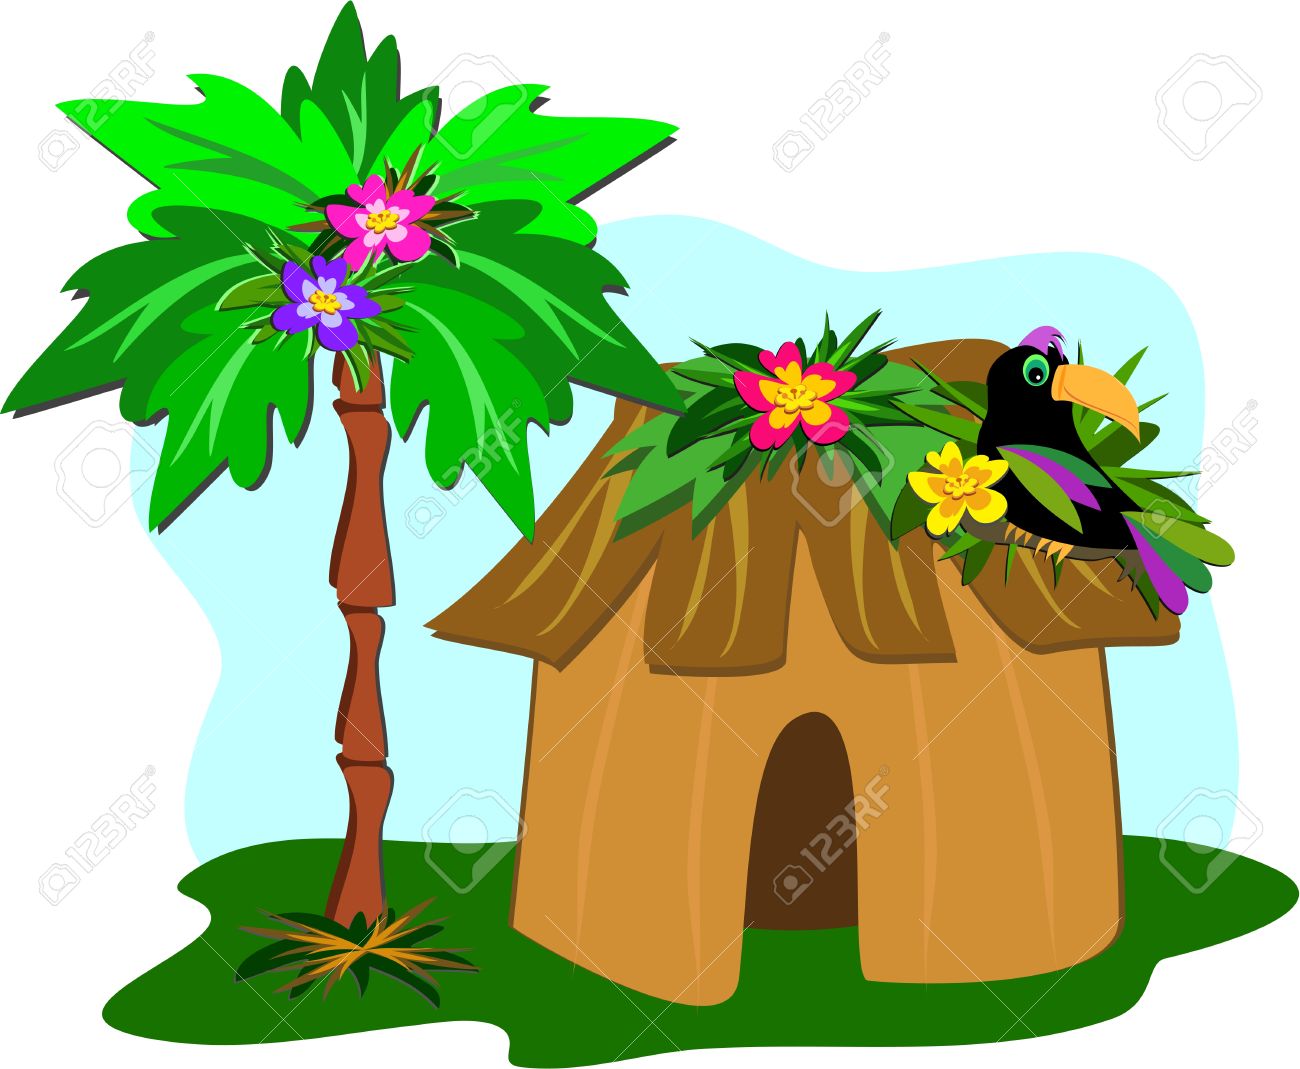 clipart images of hut - photo #32